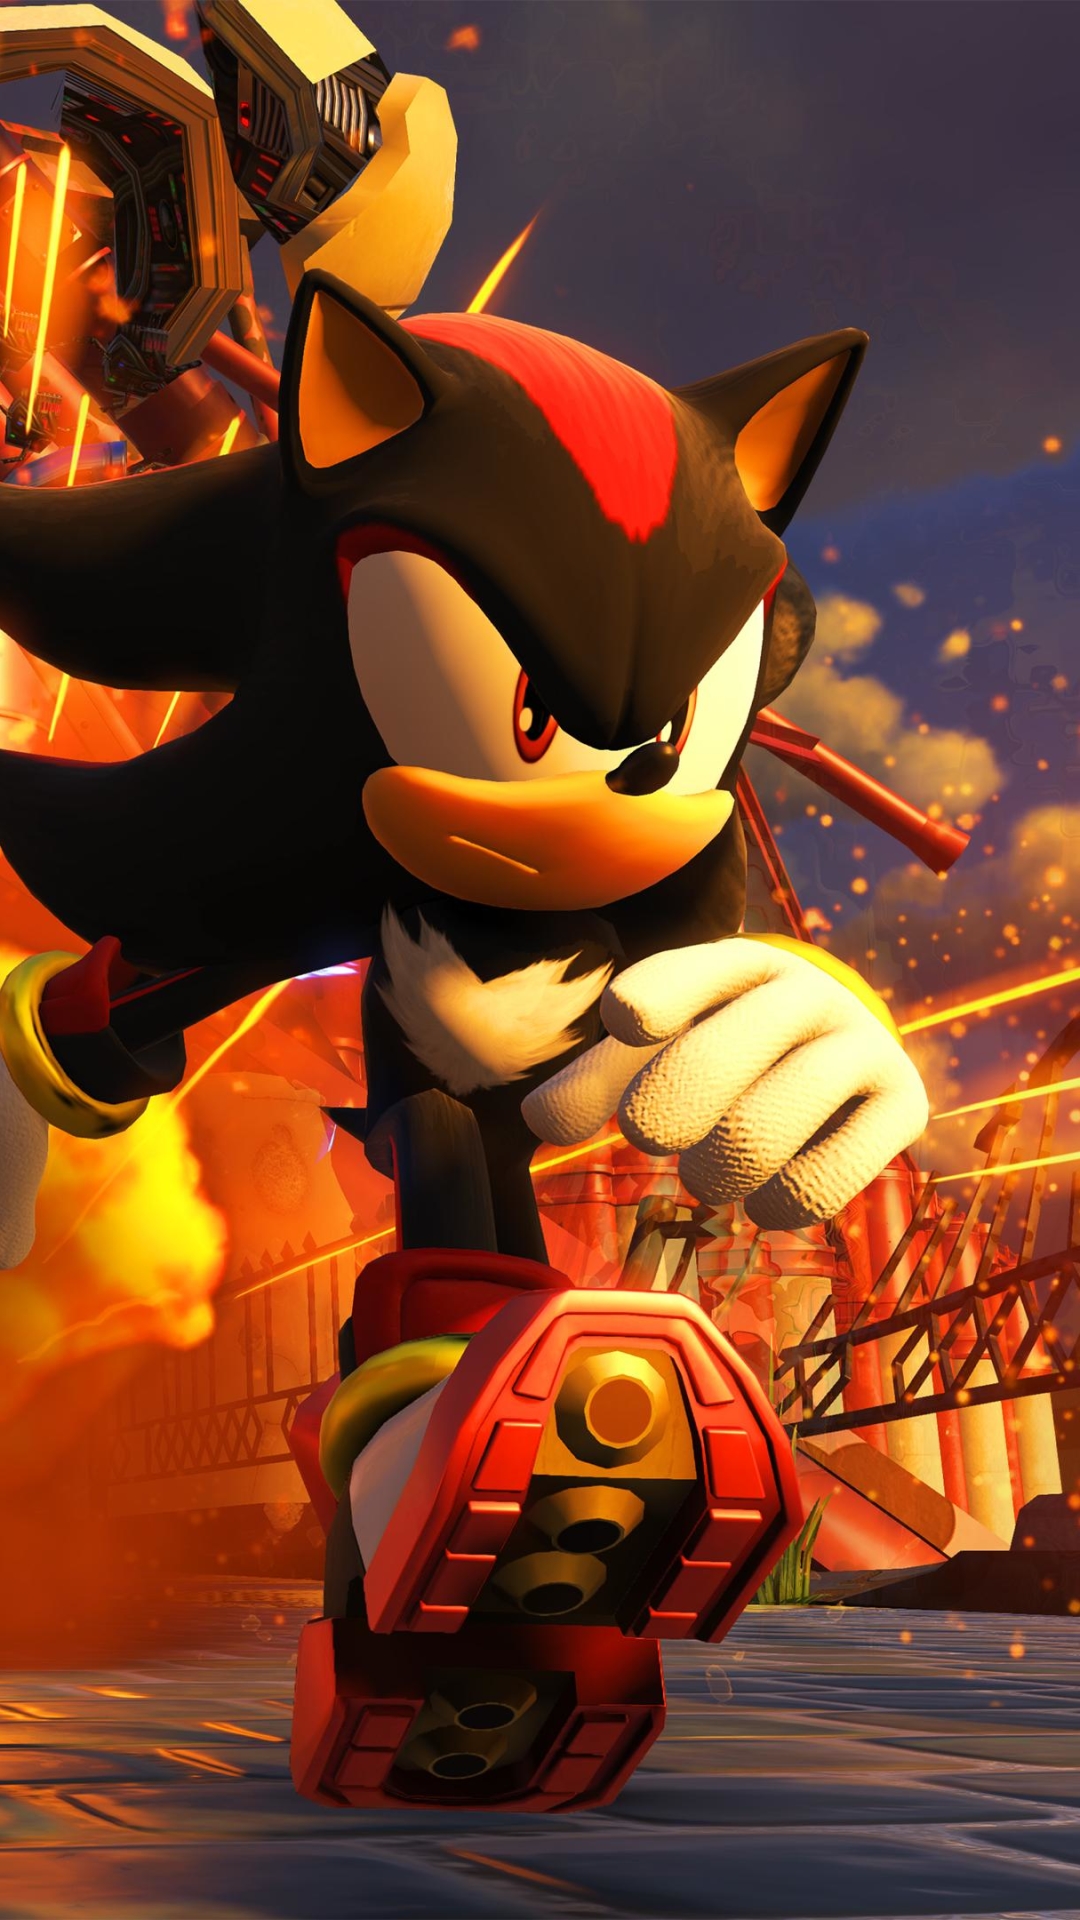 sonic, video game, sonic forces, shadow the hedgehog Full HD